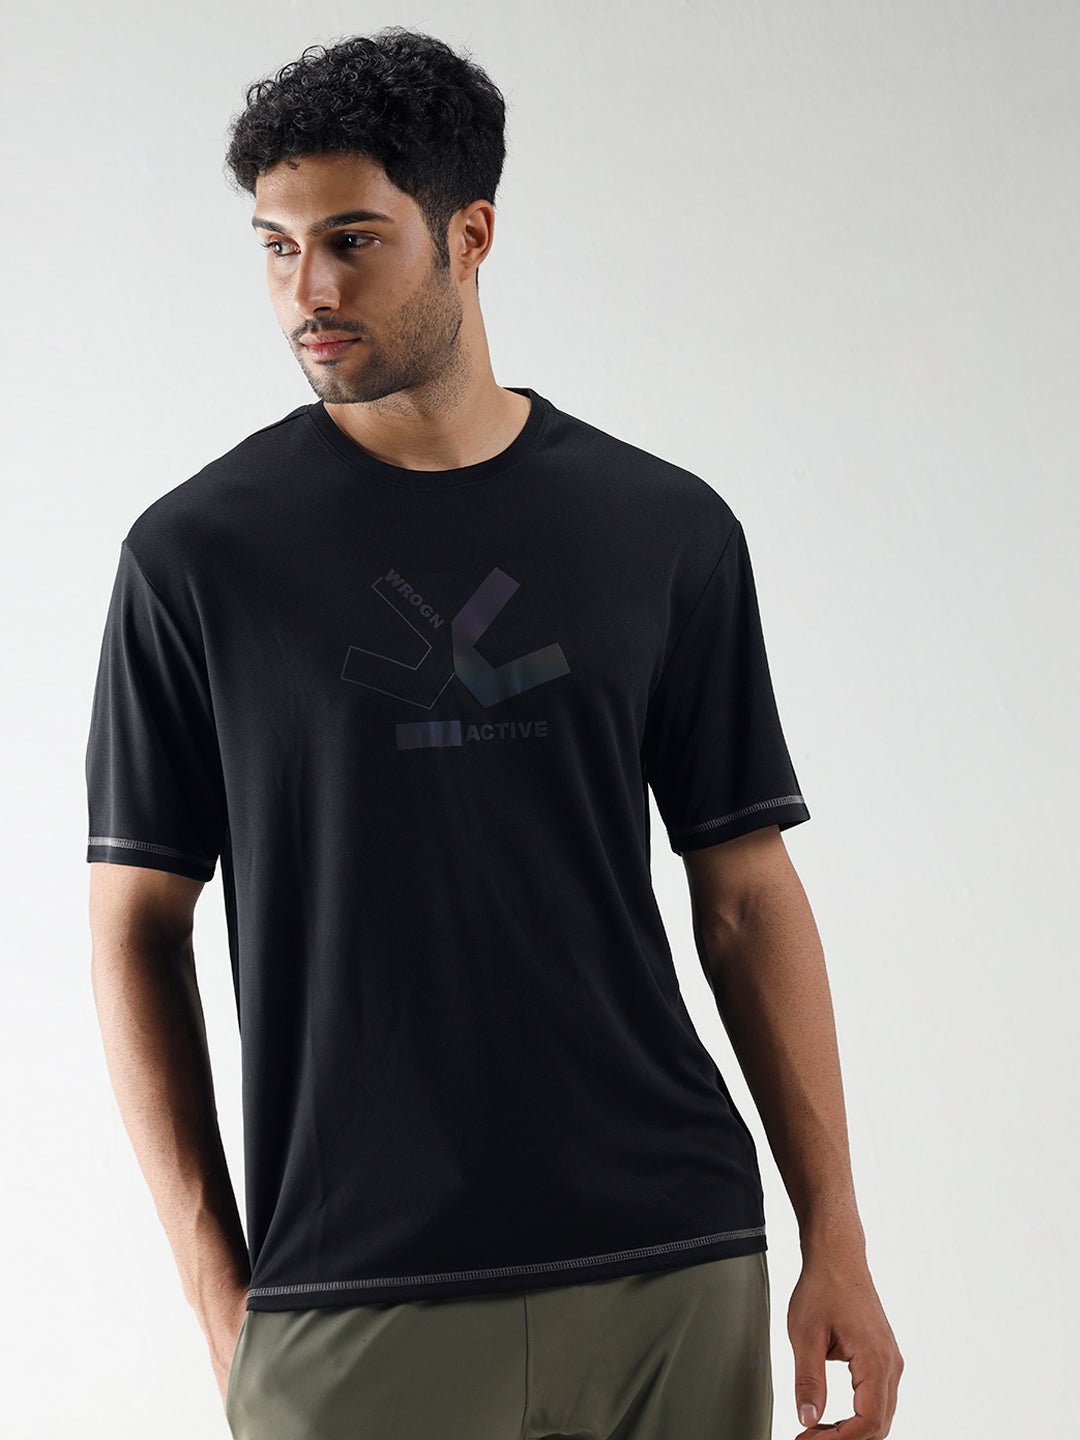 Active Performance T-Shirt – Wrogn